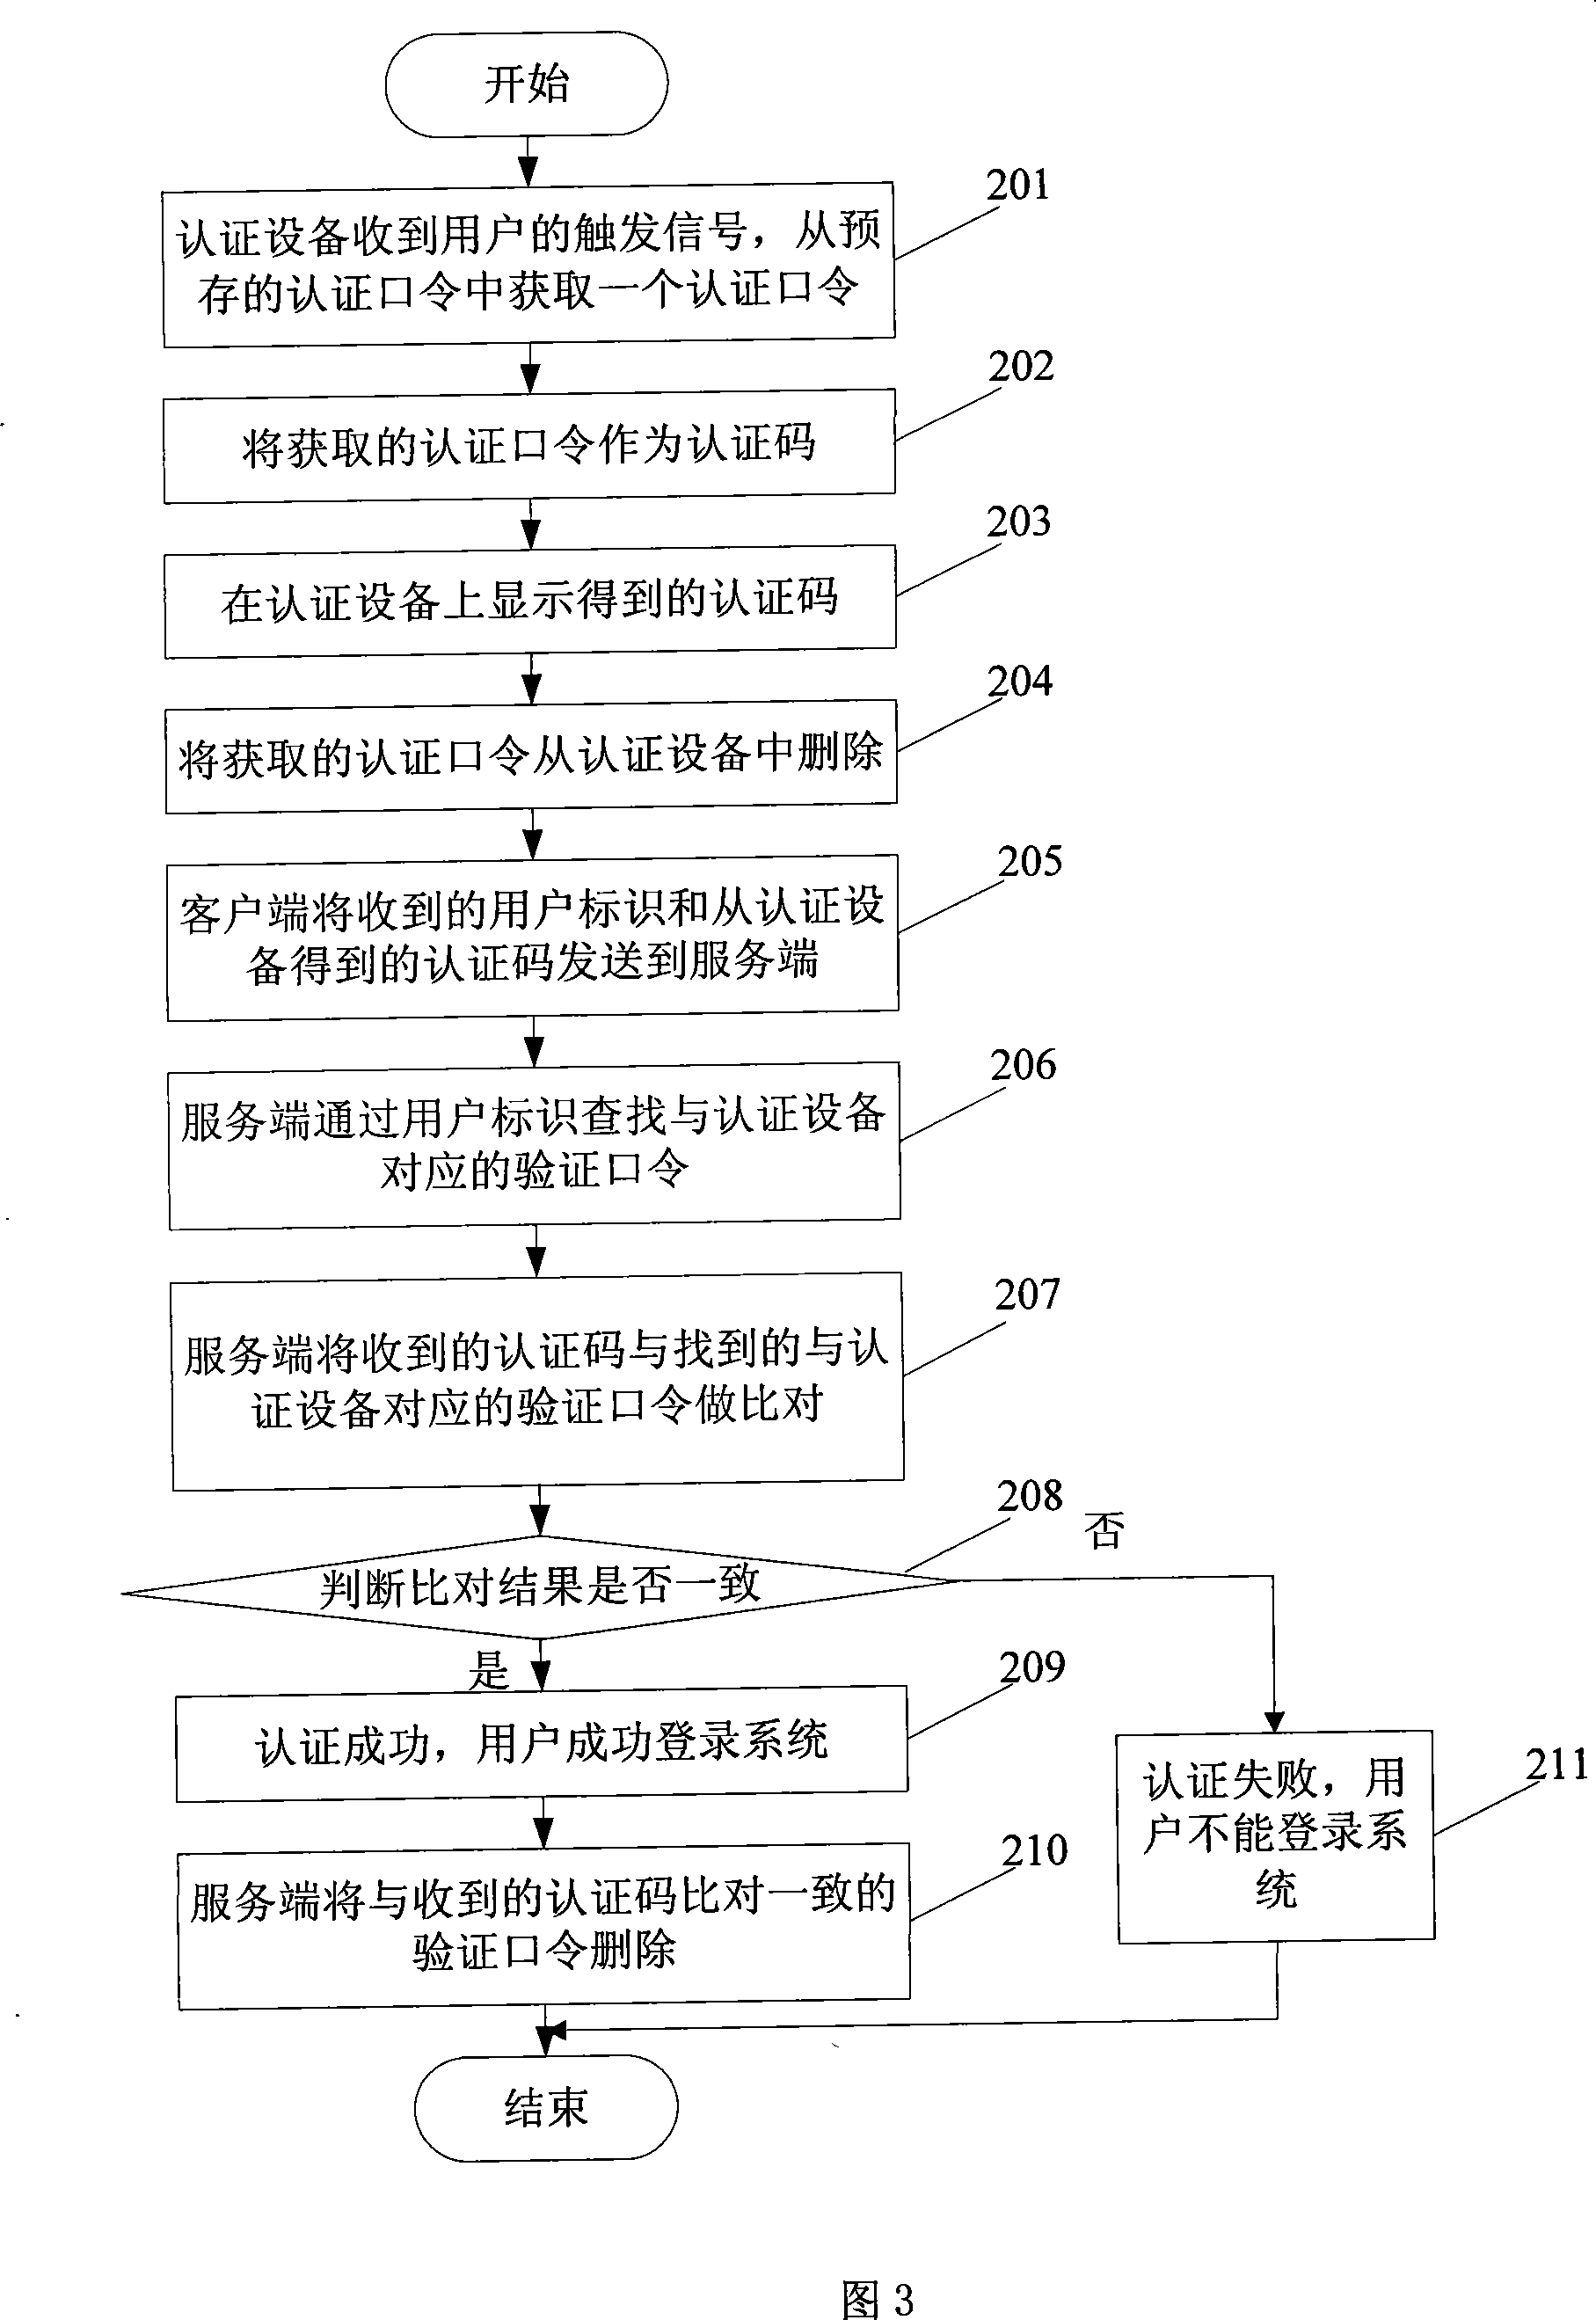 Authentication device, method and system